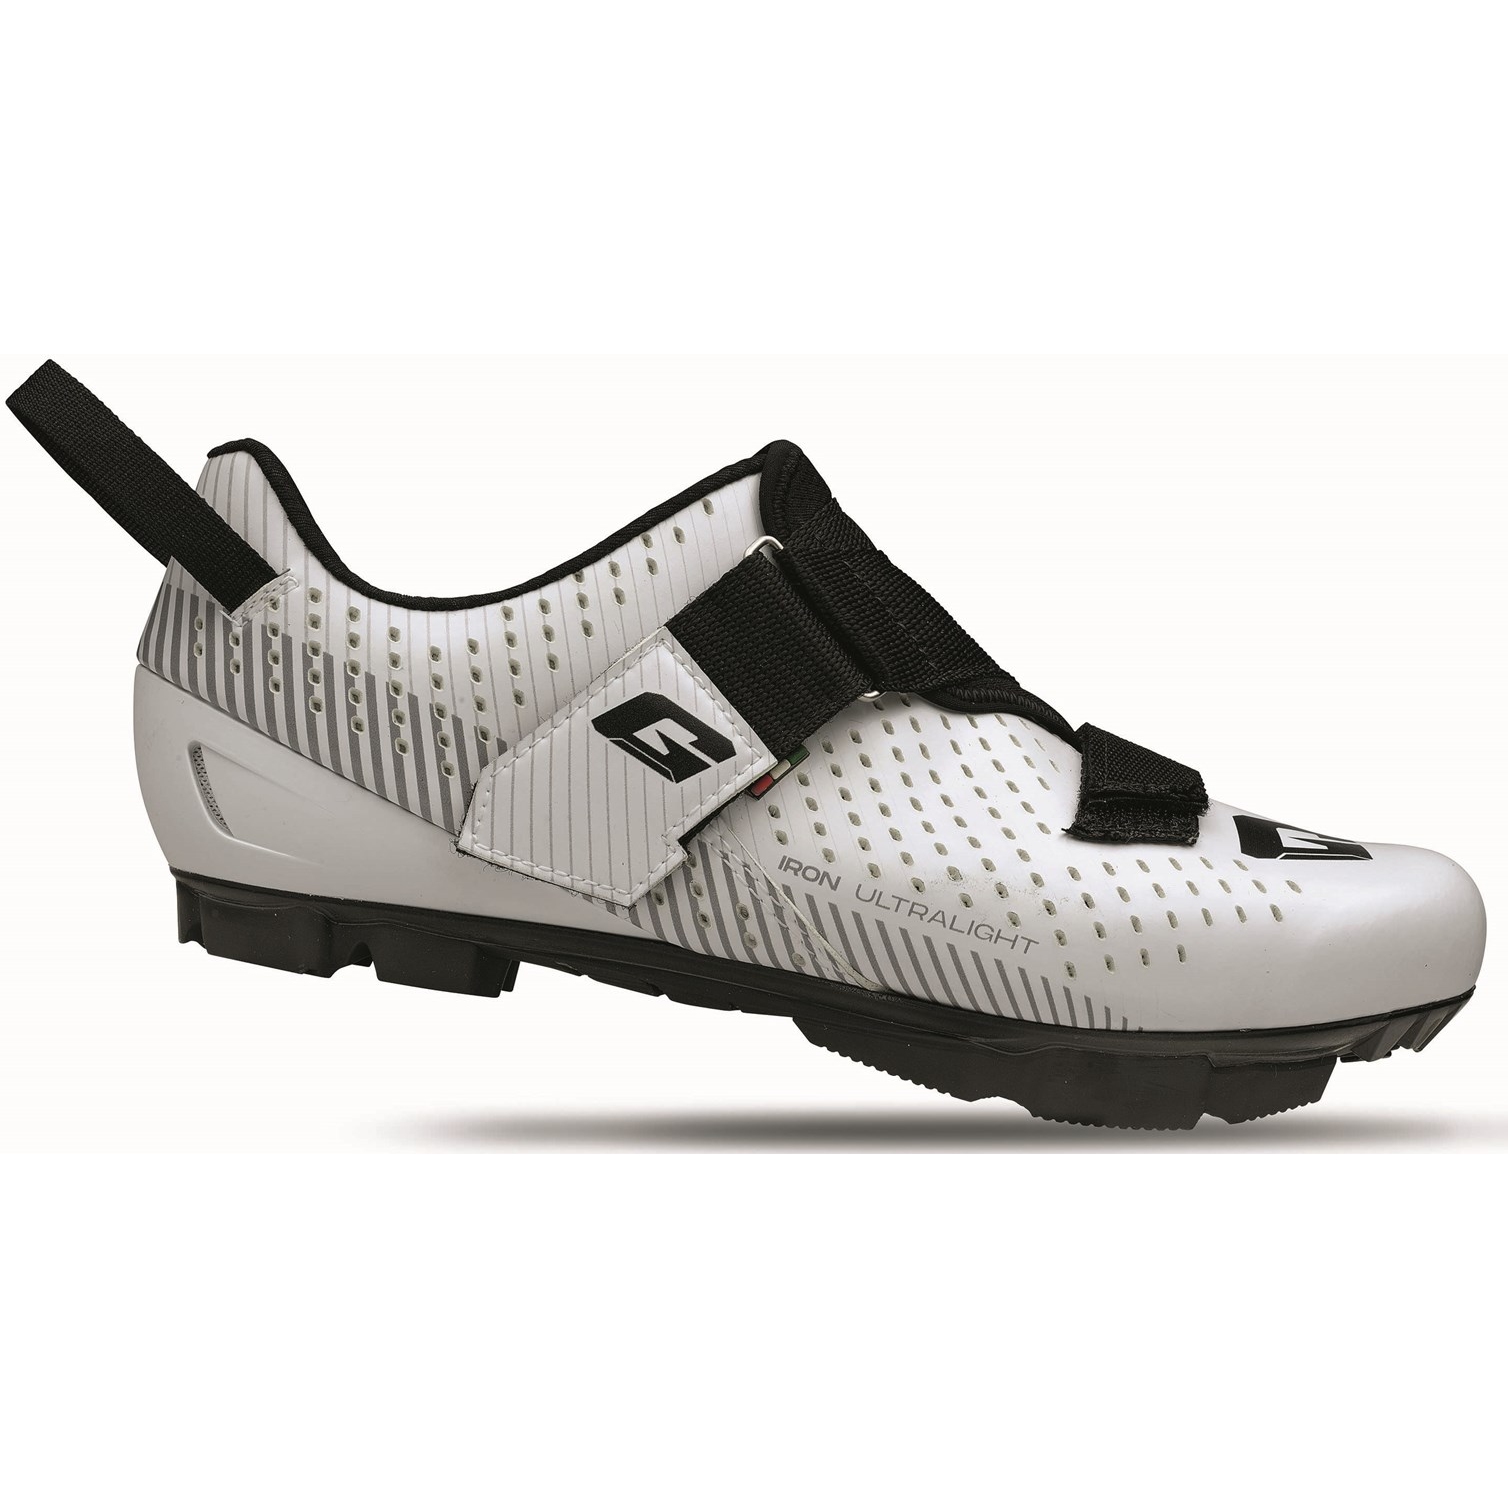 Picture of Gaerne G.Iron Triathlon MTB Shoes - White